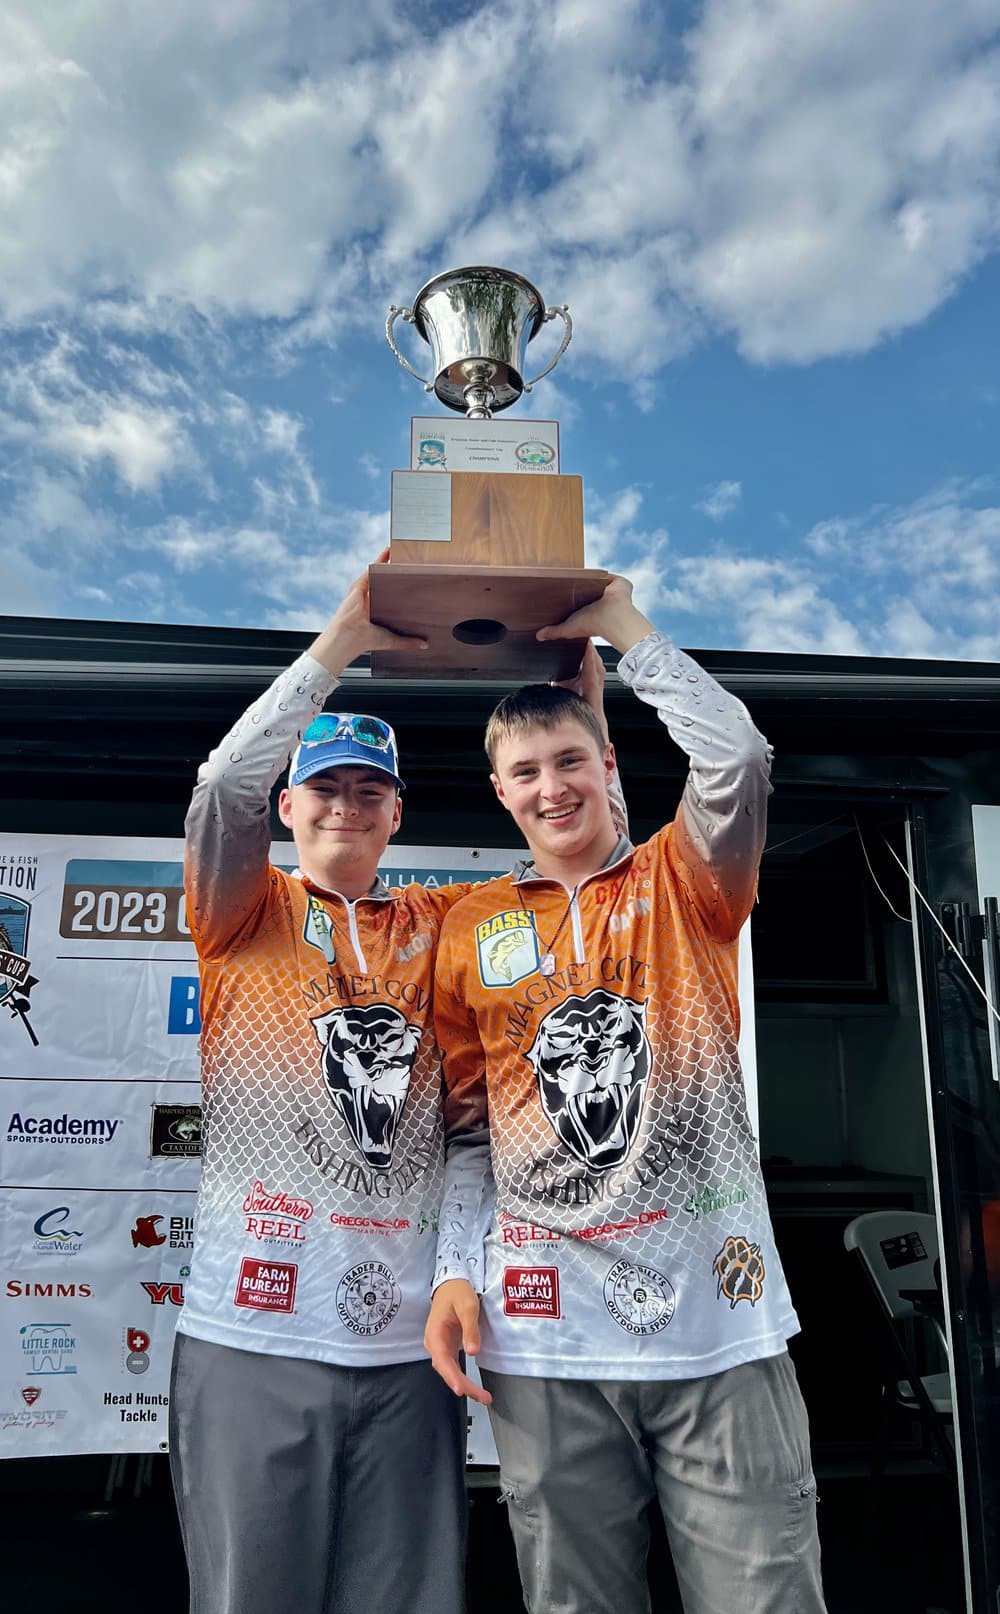 Brothers Dakota (left) and Dalton Reid took first place and big bass honors at the 2023 Commissioners’ Cup Saturday. AGFF photo.